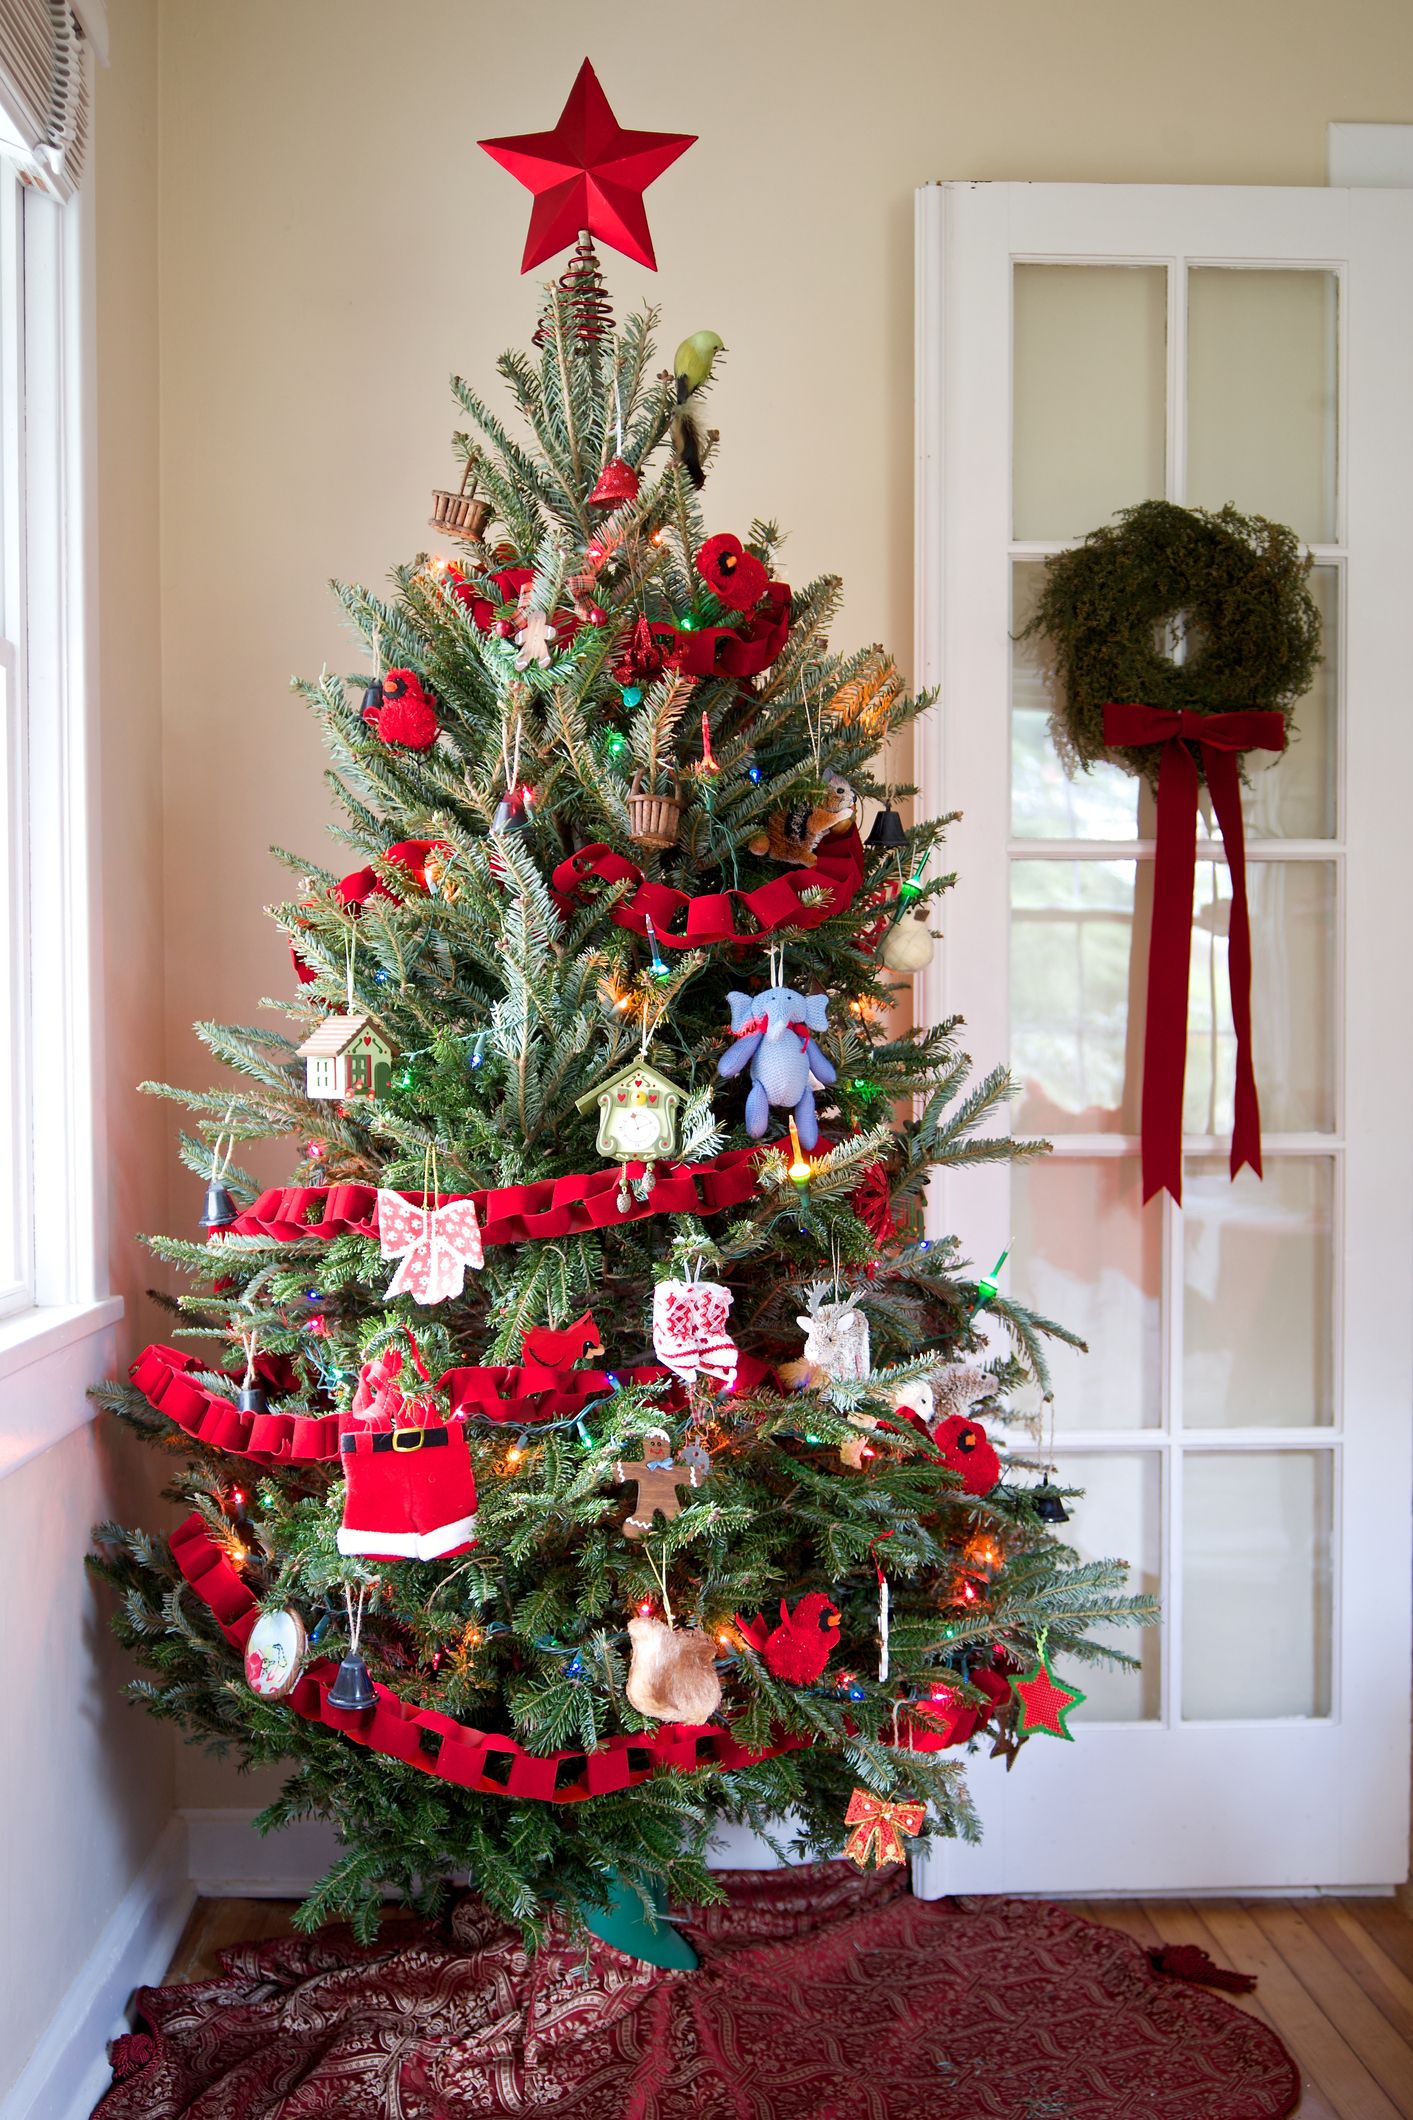 Christmas Trees Decorated With Red Ribbon